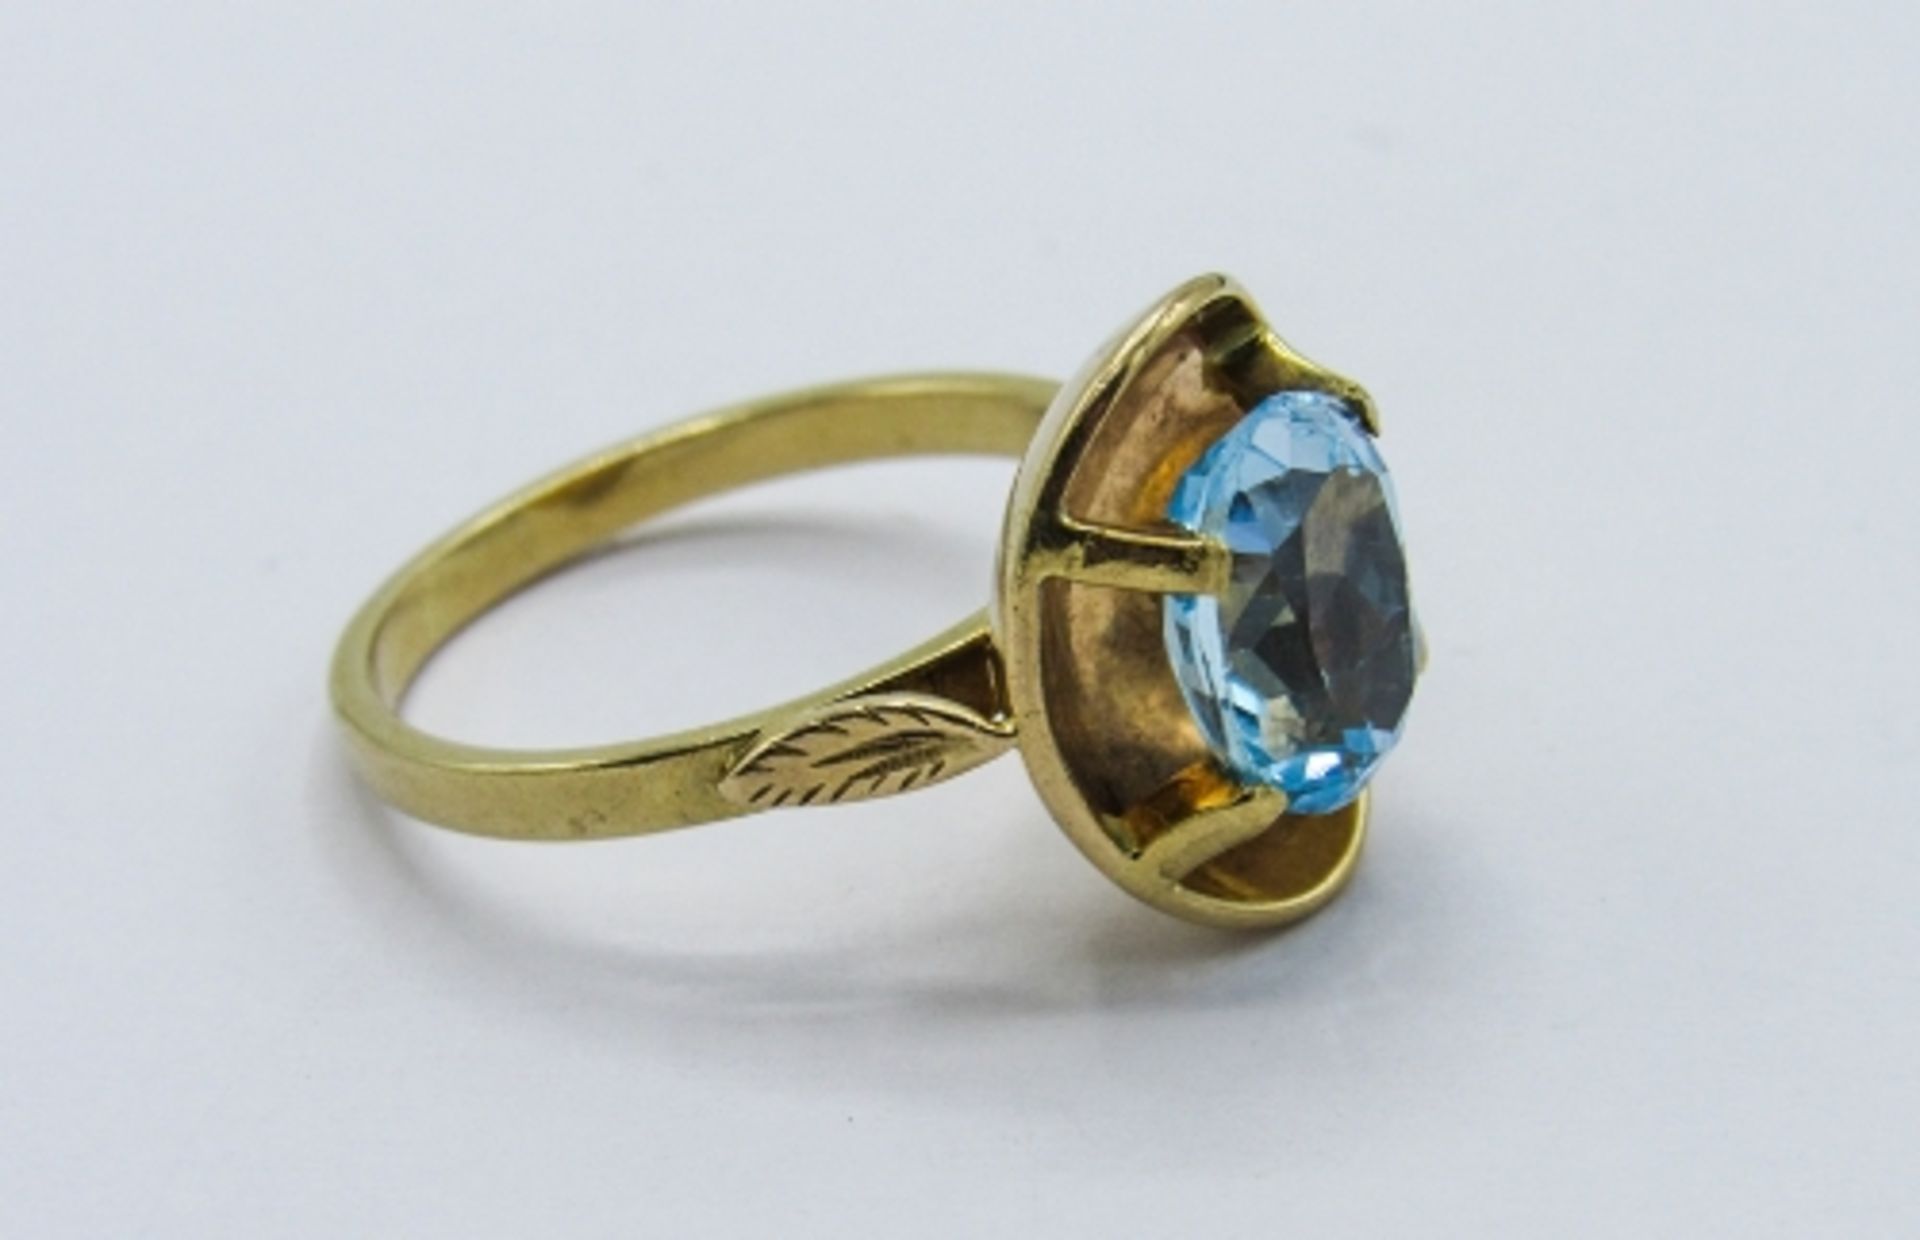 9ct gold topaz ring, weight 4.8gms, size Q. Estimate £150-170 - Image 4 of 4